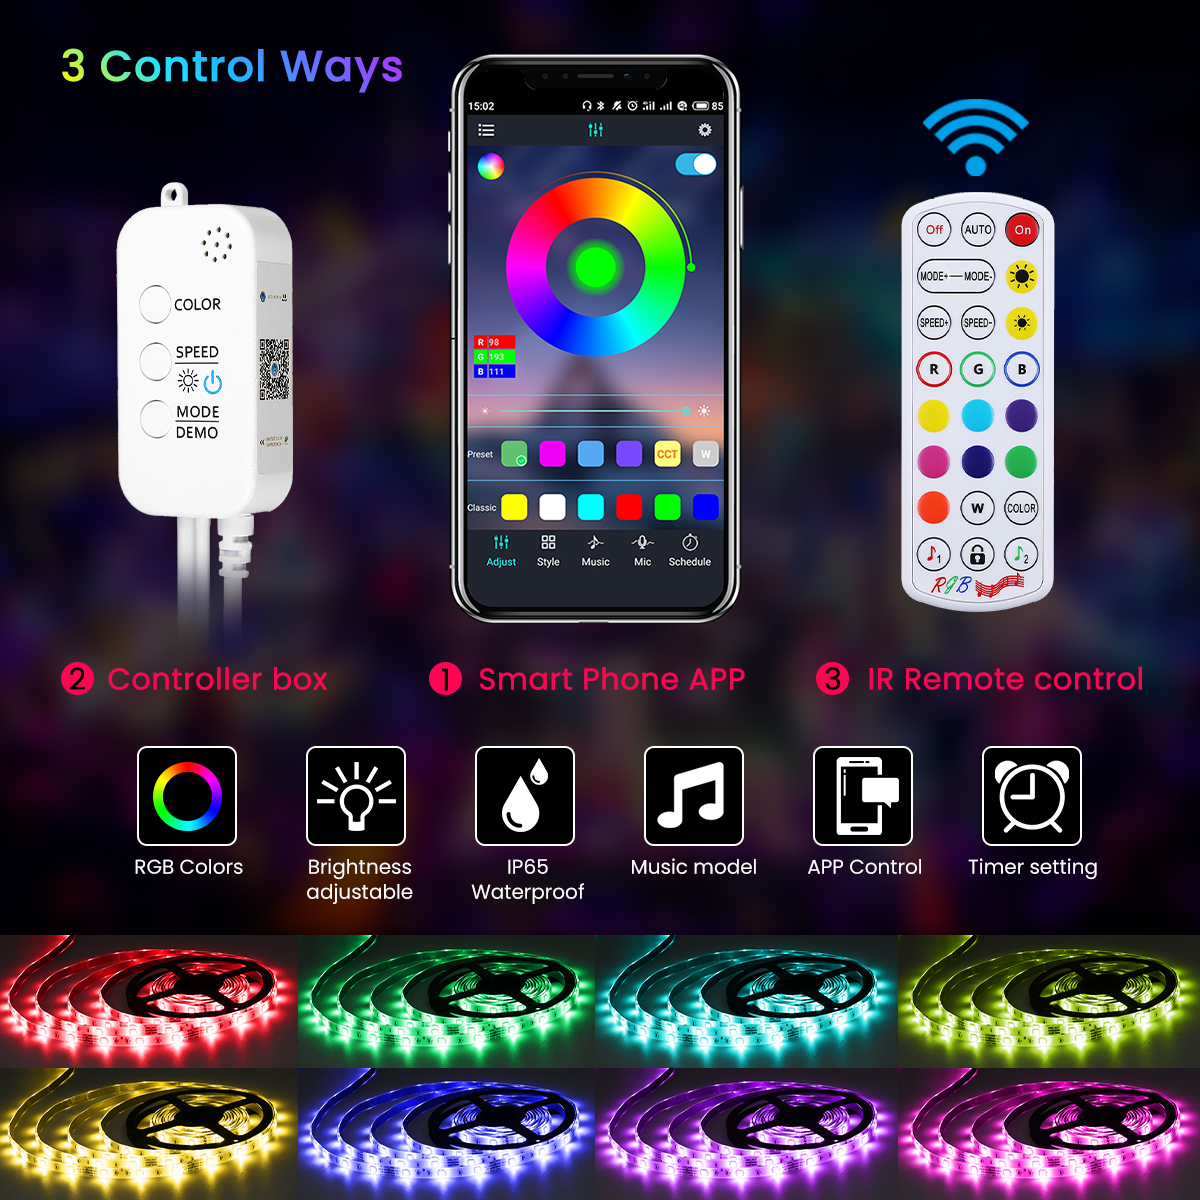 5M bluetooth Non-waterproof RGB LED Strip Light 5050 Music Lamp + 24Keys Remote Control + 12V 2A Power Supply Christmas Decorations Clearance Christmas Lights